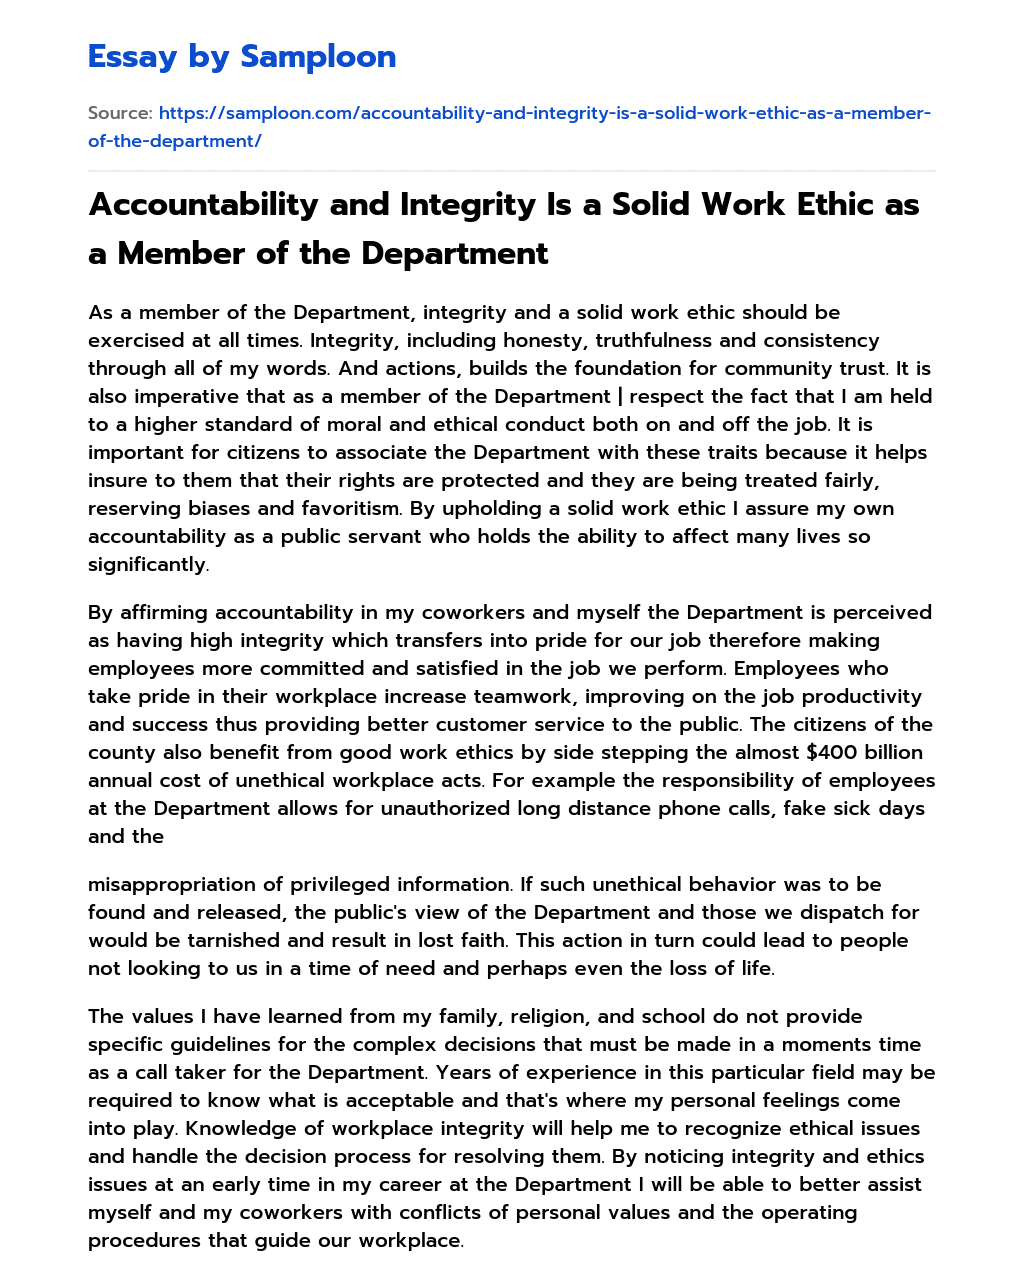 Accountability and Integrity Is a Solid Work Ethic as a Member of the Department essay